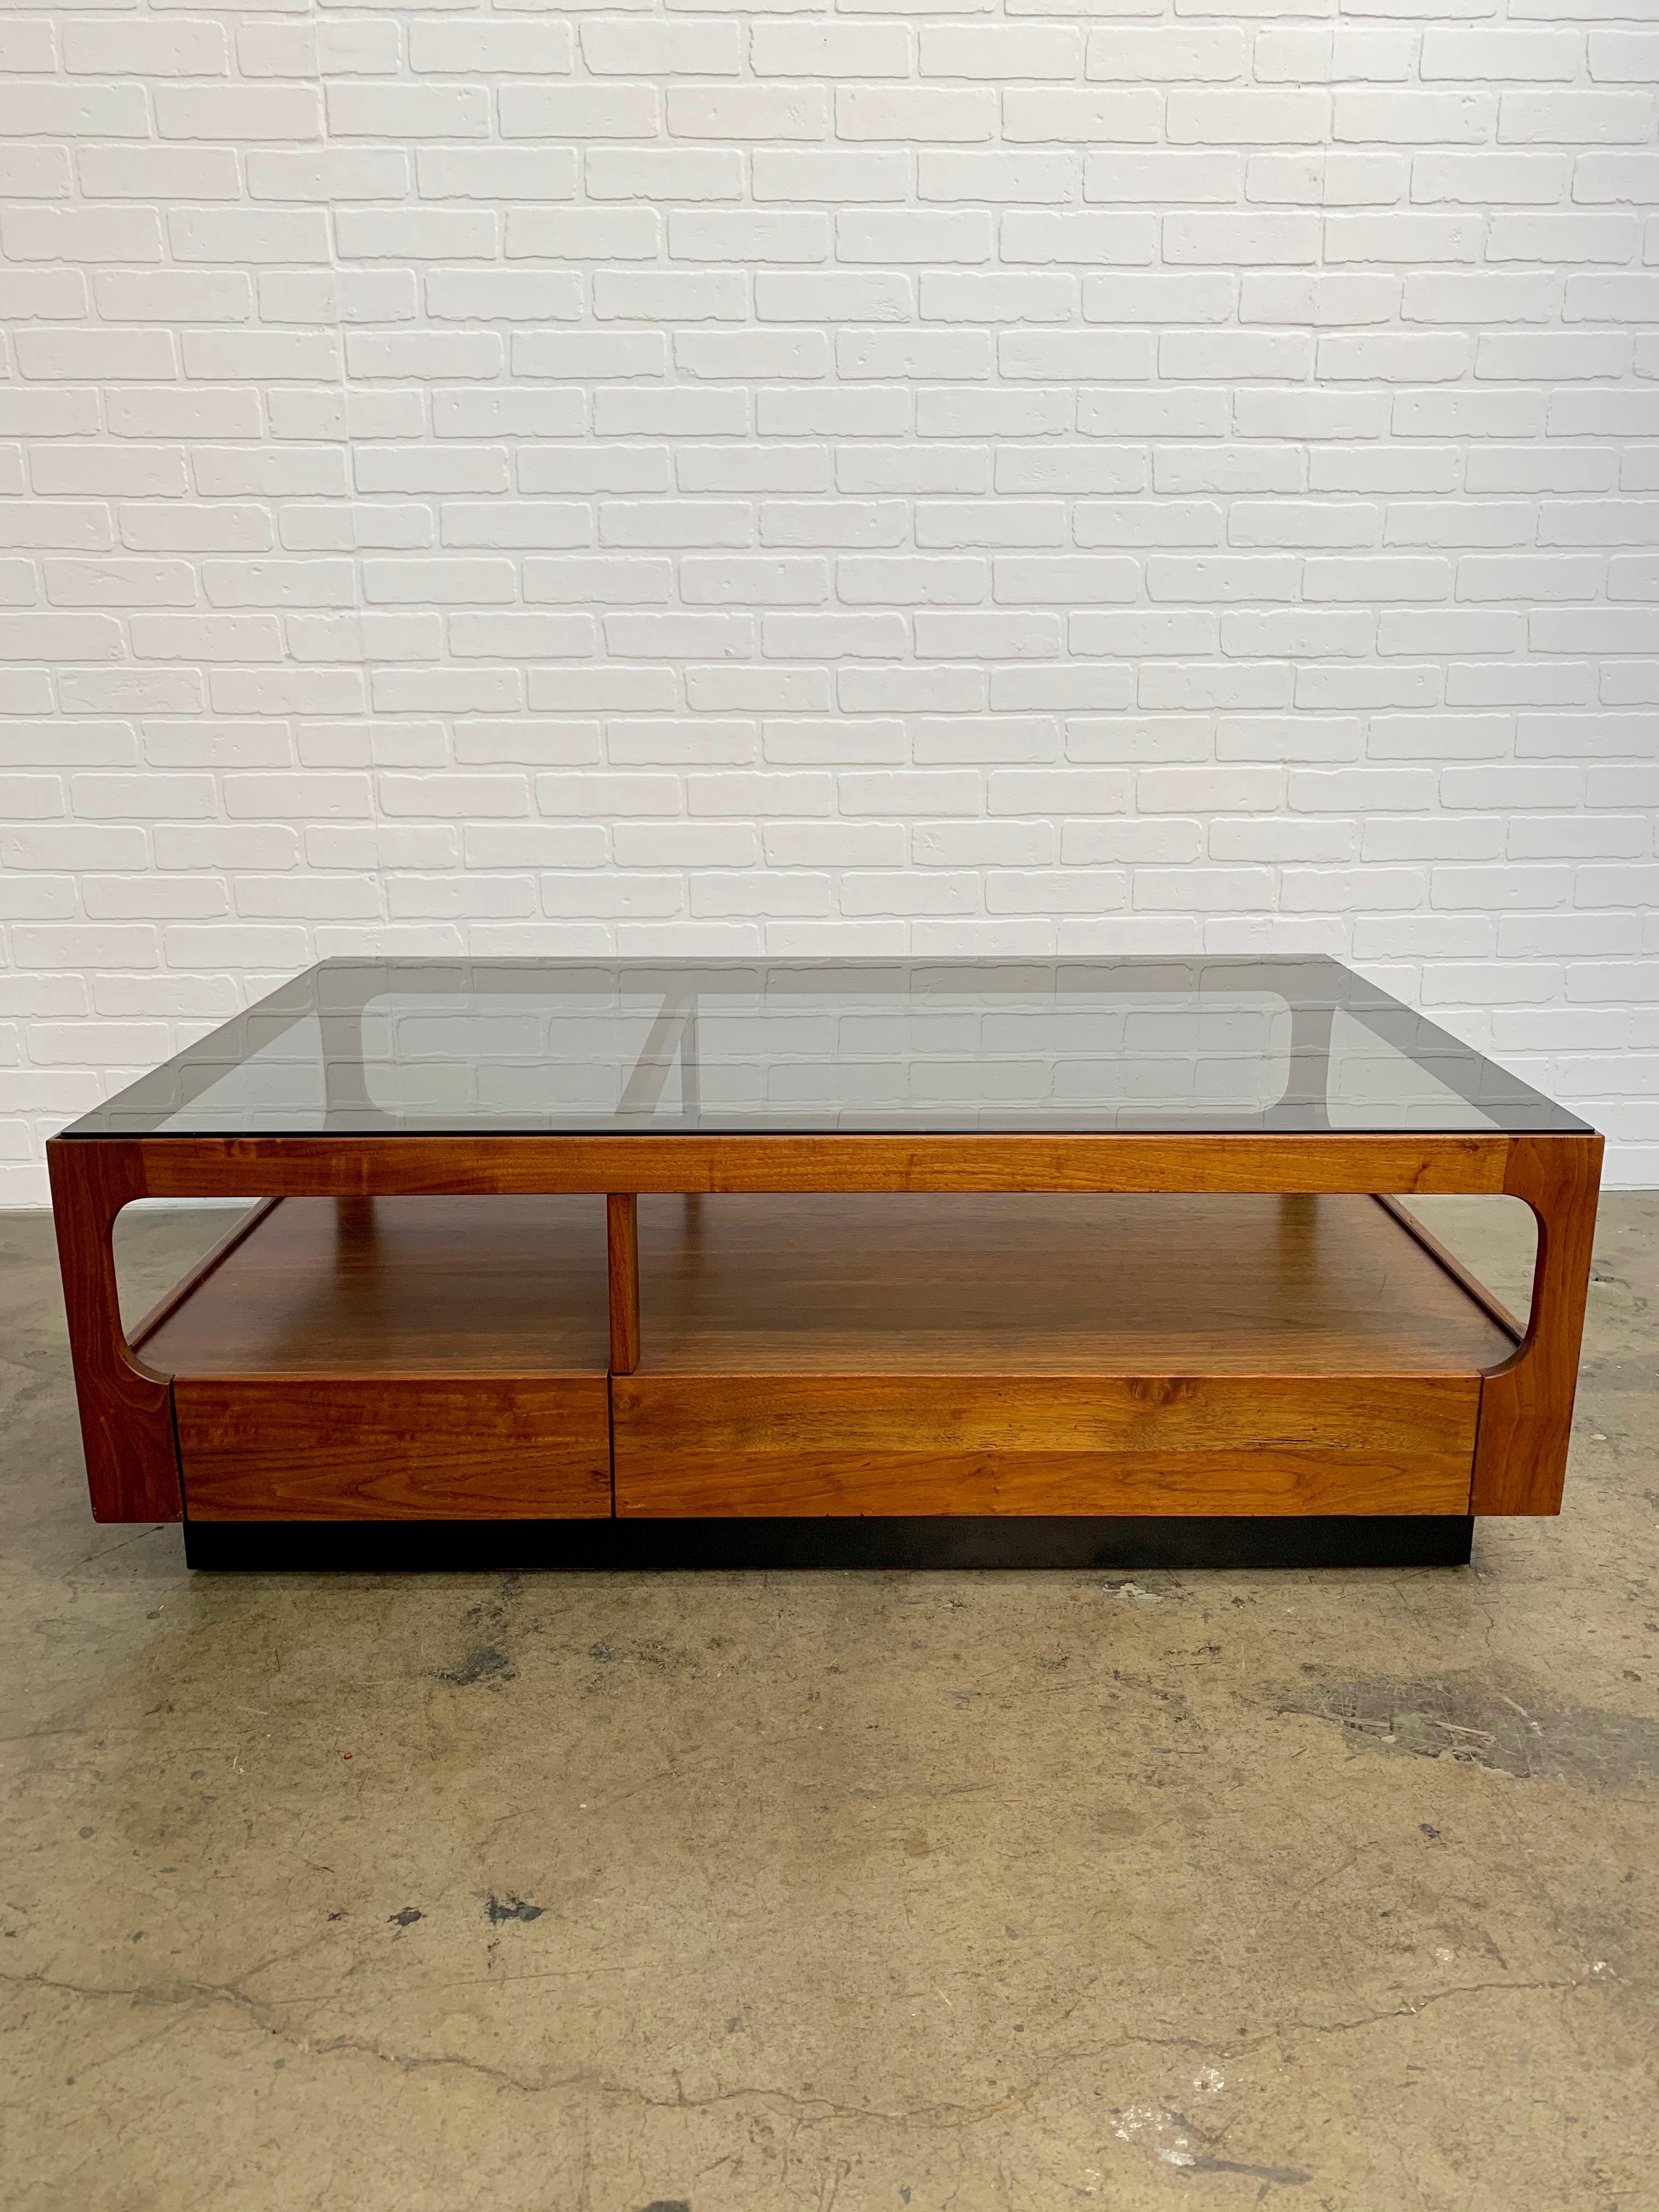 Walnut with smoked glass top, two tiered coffee table that also has two storage drawers.